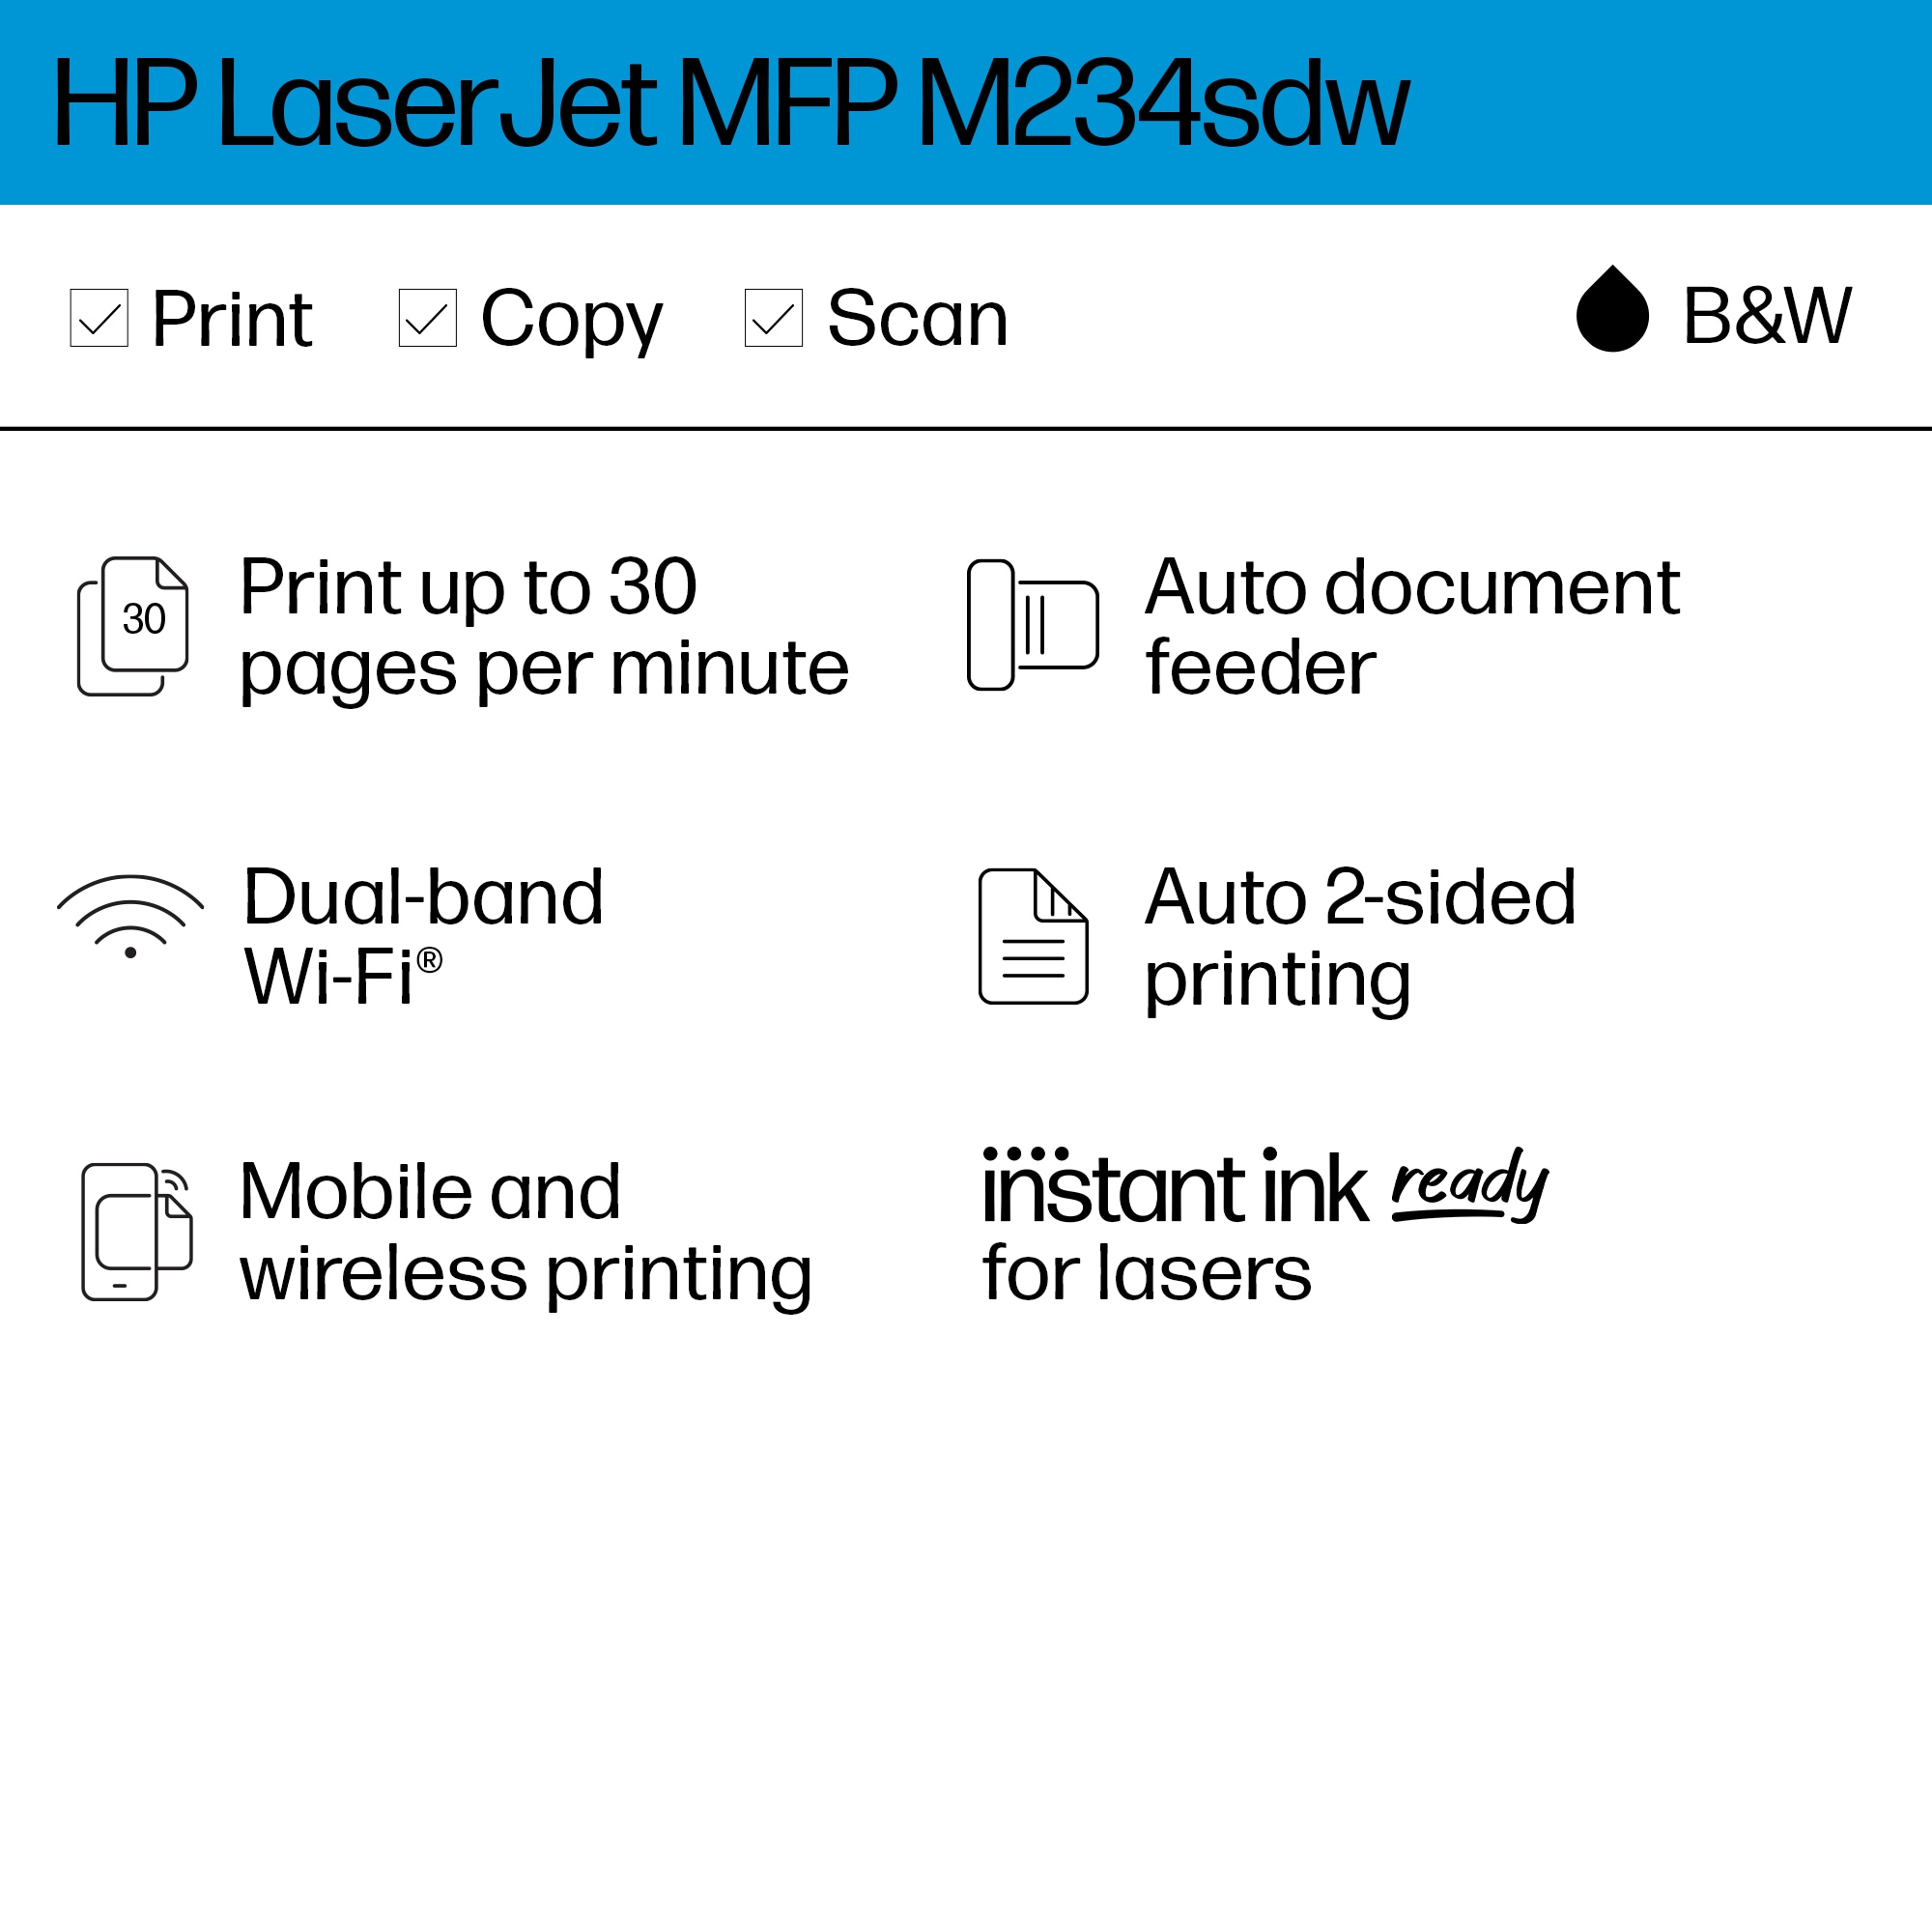 Printer with months LaserJet Instant M234sdw available HP Ink MFP 2